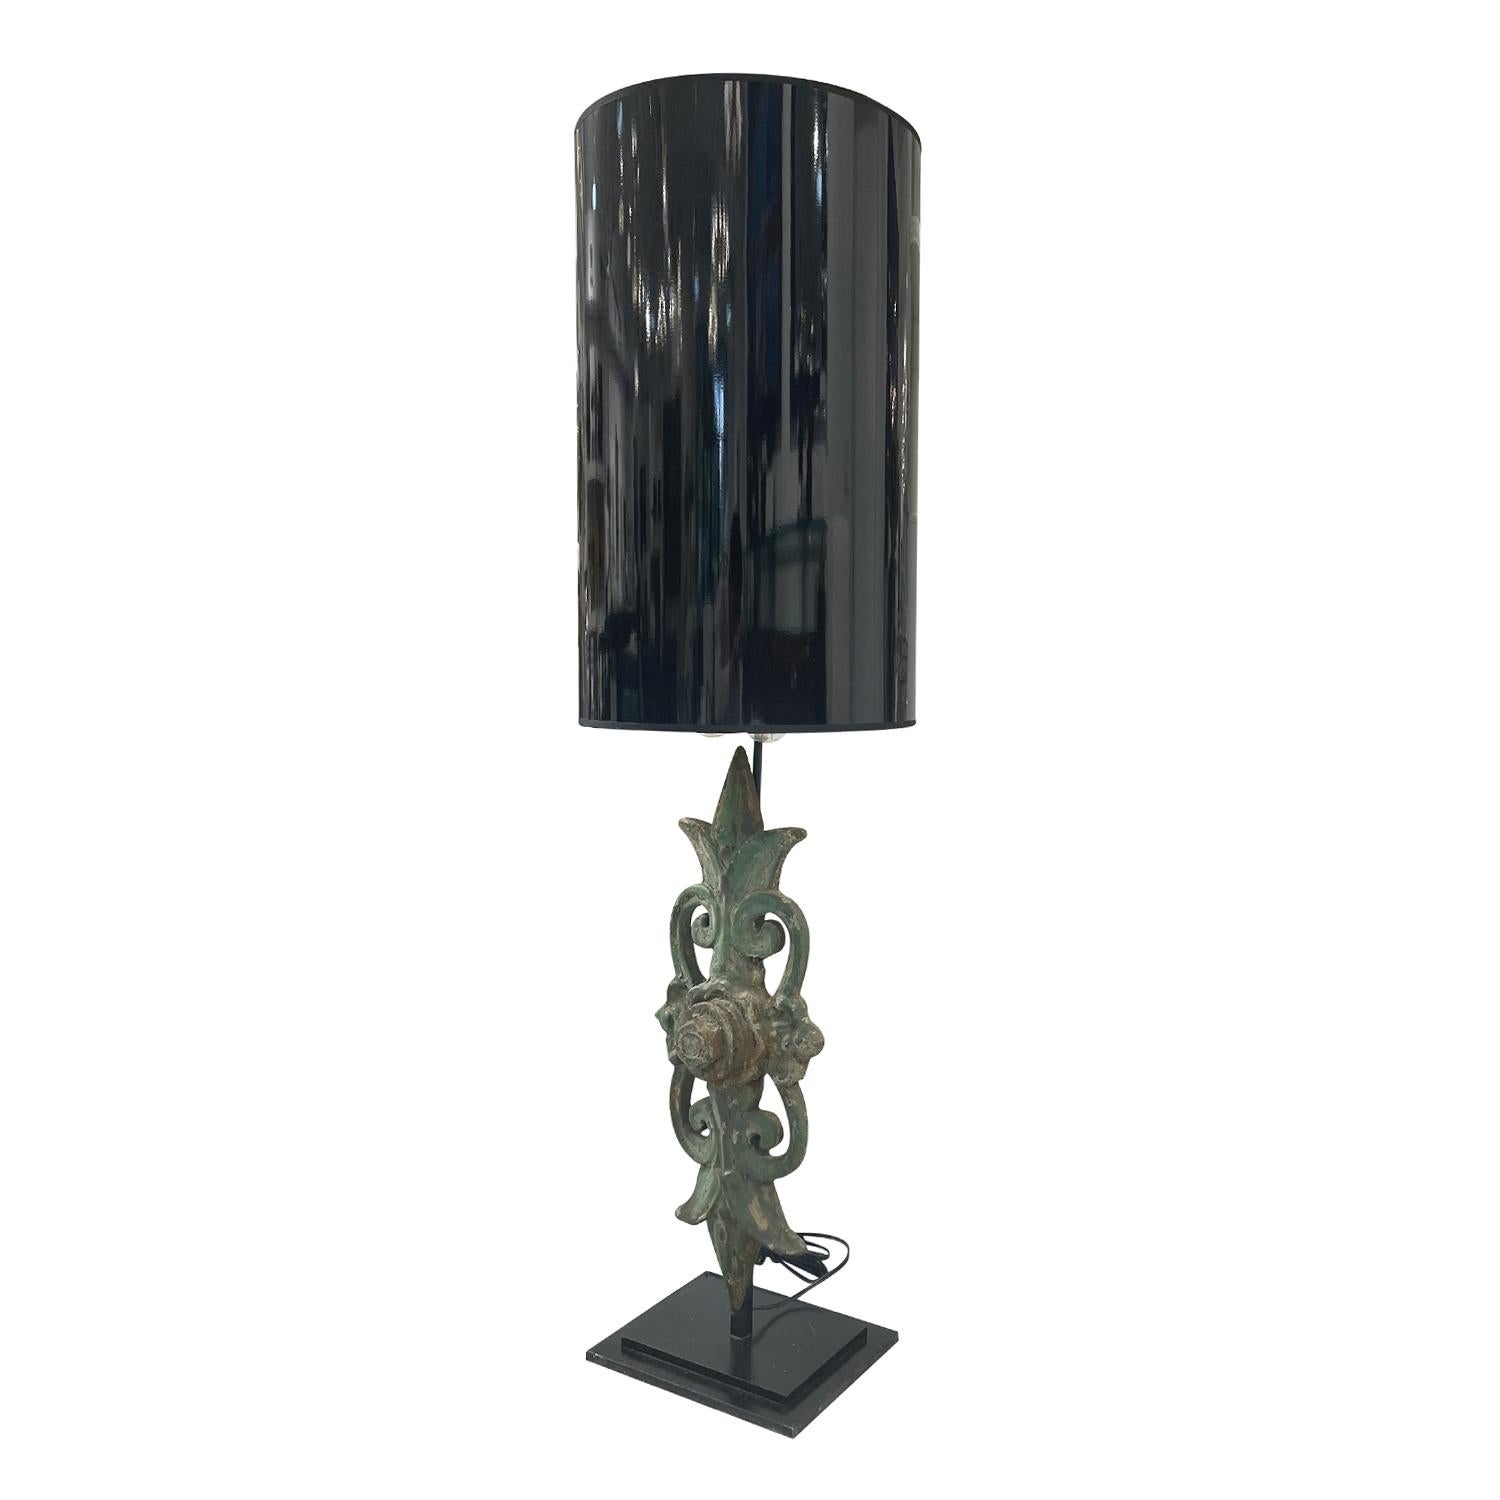 An antique French tall table lamp with a green iron ornament which is supported, halted by a black metal base, in good condition. The sculptural décor light is composed with a new black shade, featuring a two light socket. The wires have been